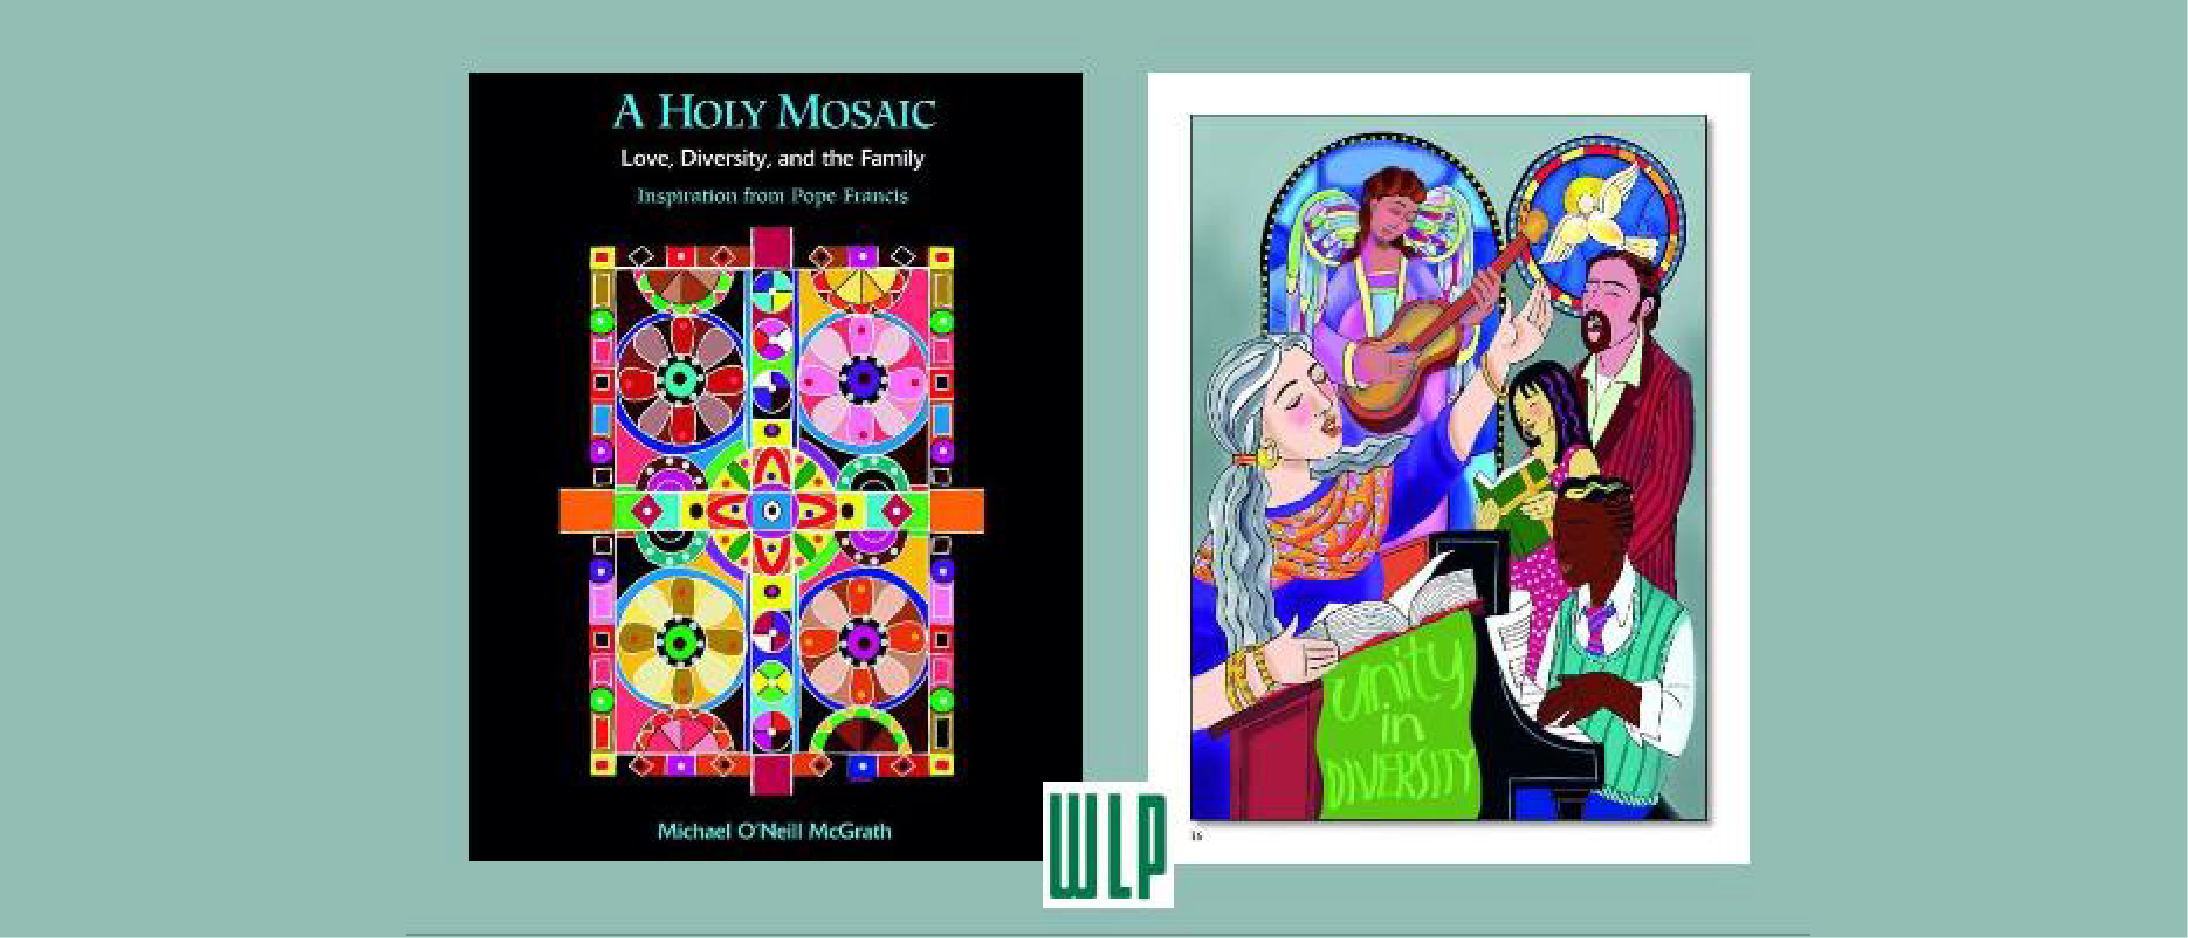 A HOLY MOSAIC: Love, Diversity and the Family